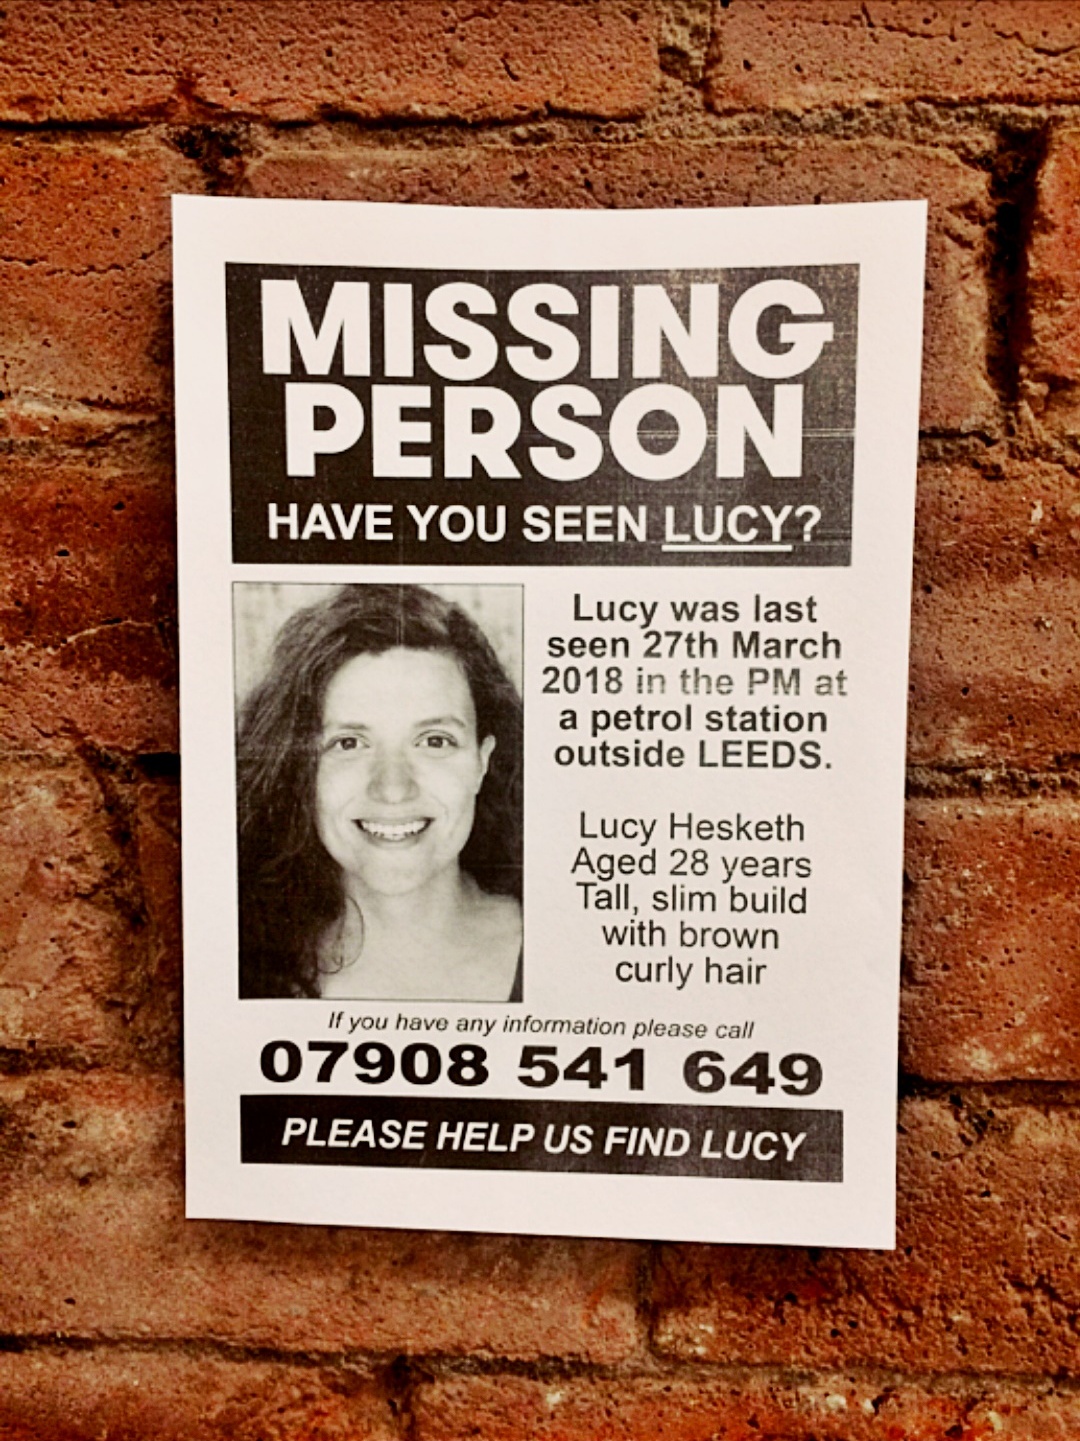 Lucy is missing - The Lucky Ones, immersive theatre experience by Riptide Leeds, review by BeckyBecky Blogs